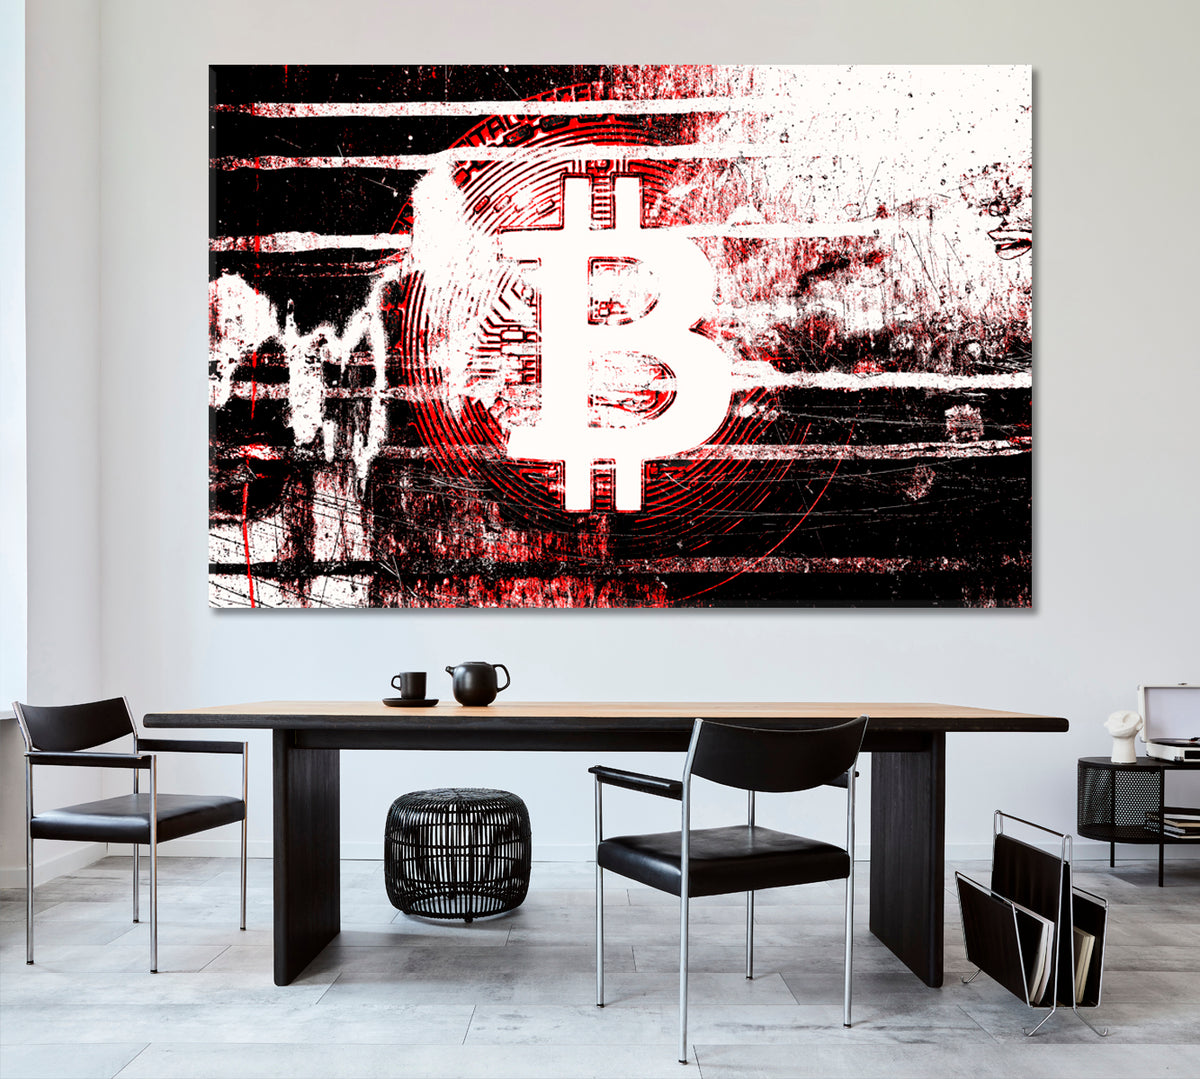 Bitcoin Cryptocurrency BTC Bit Coin Abstract Grunge Office Poster Business Concept Wall Art Artesty 1 panel 24" x 16" 